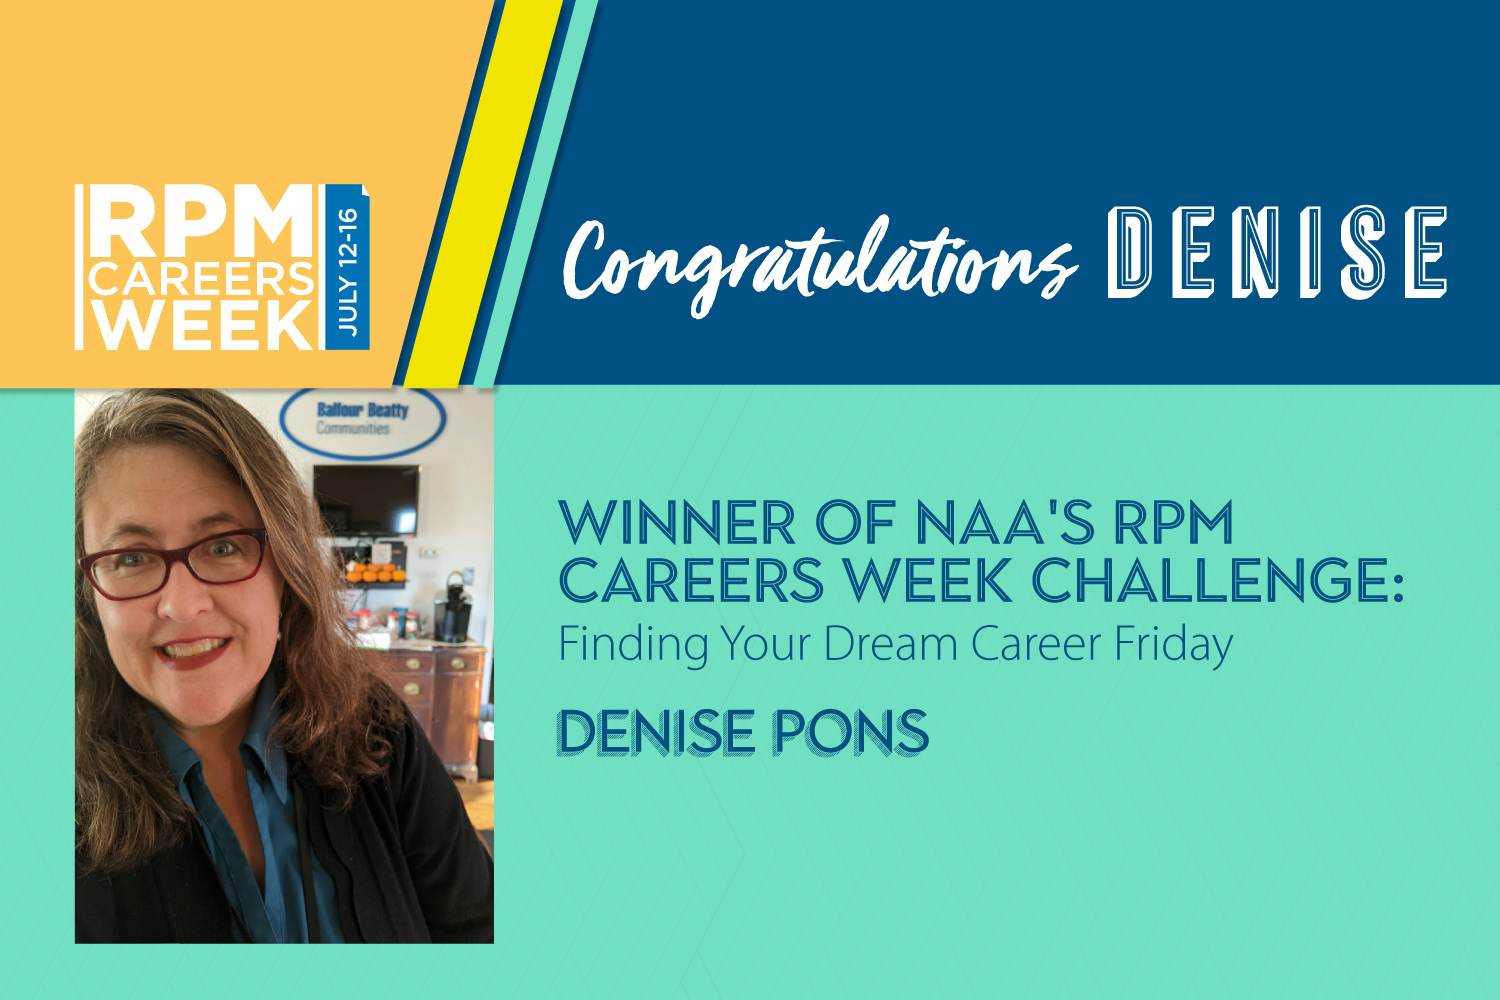 BBC’s Denise Pons Recognized by NAA for RPM Careers Week Challenge